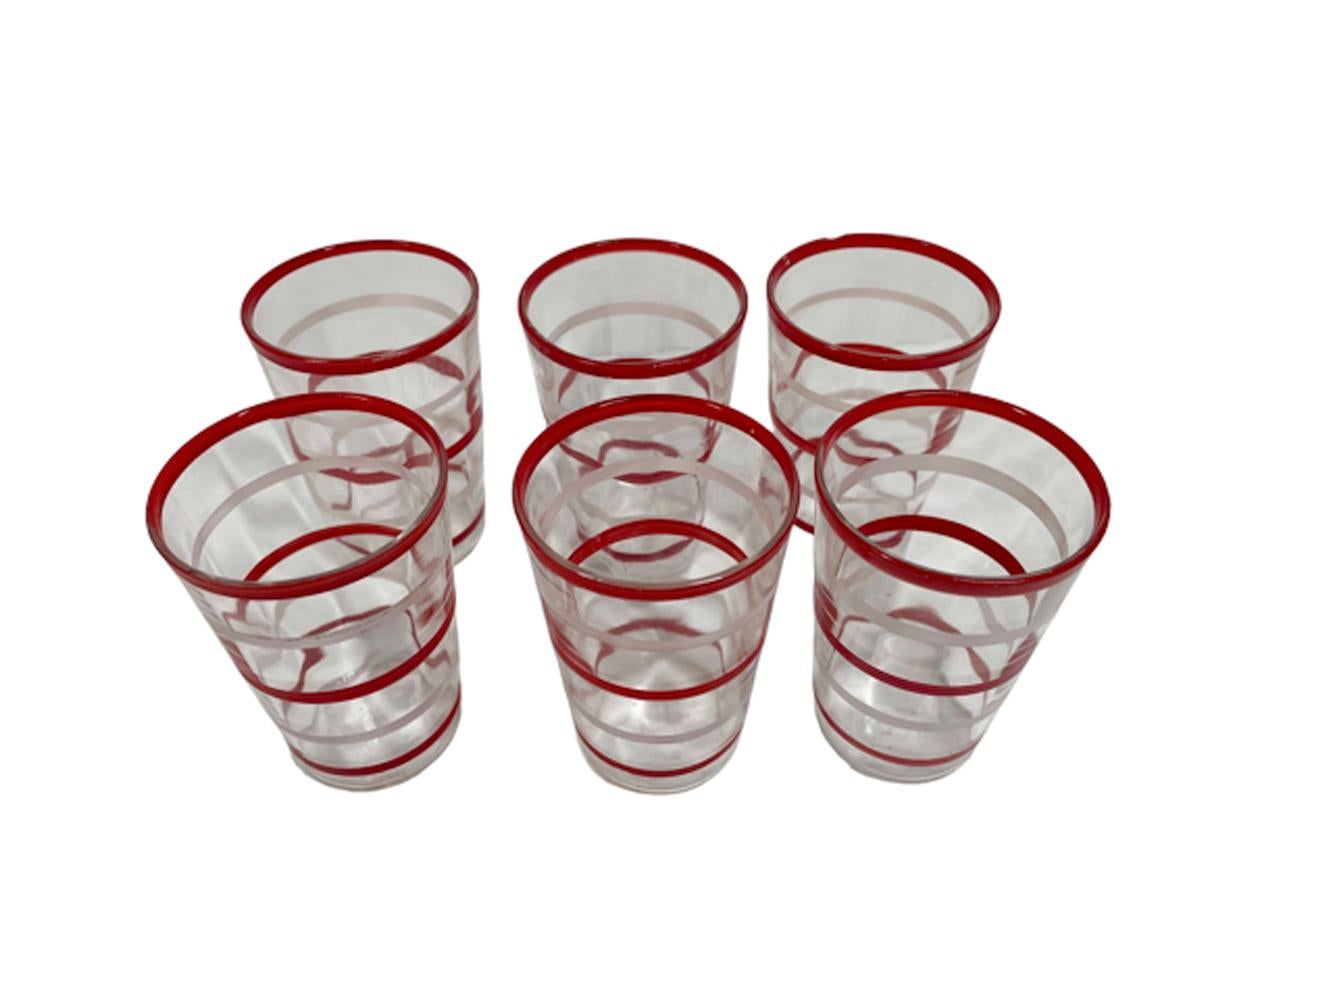 15 Piece Hand Painted Art Deco Cocktail Shaker Set with Red and White Bands In Good Condition For Sale In Chapel Hill, NC